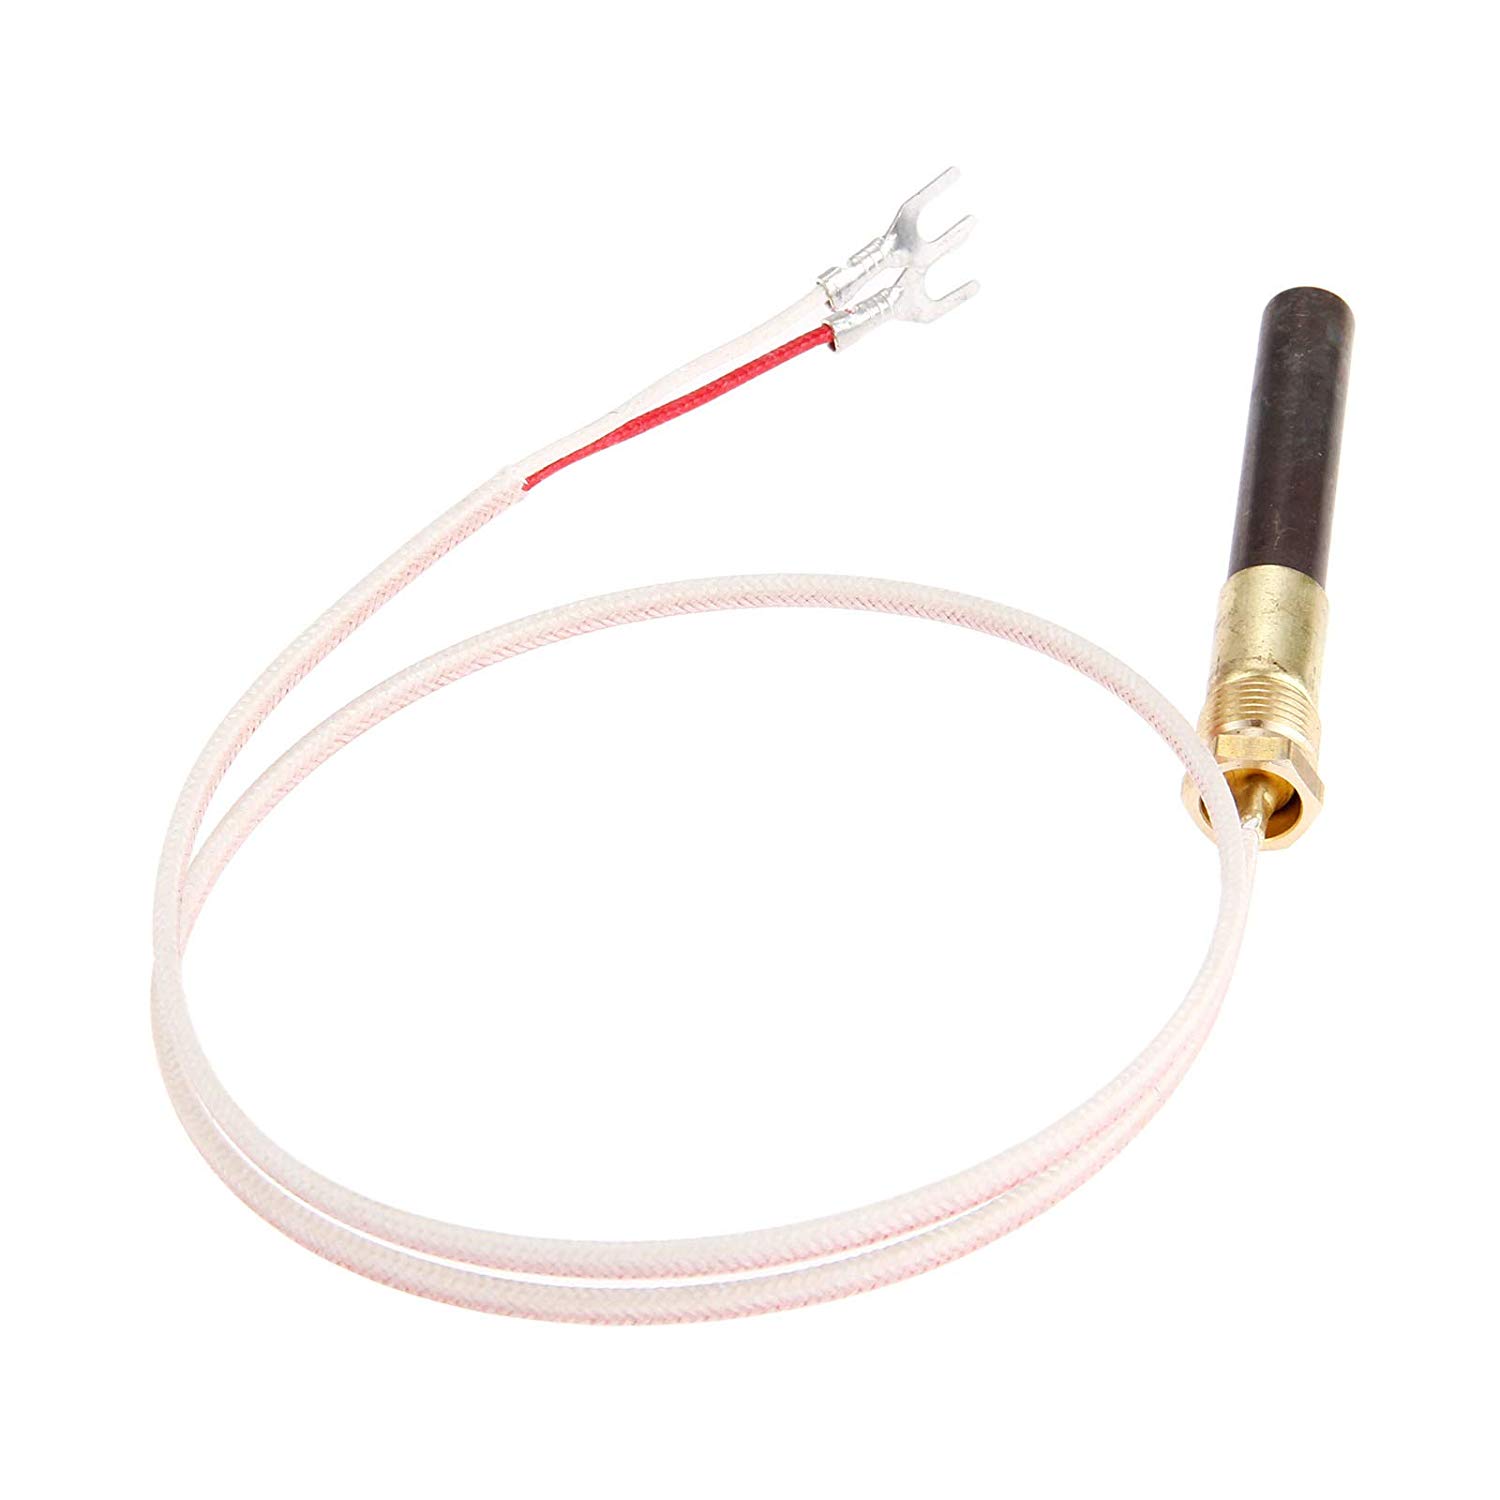 Gas Fireplace thermopile Replacement Beautiful Aupoko 24" Fireplace Millivolt thermopile with 750â Temperature Resistance Fit for Gas Fireplace Water Heater Gas Fryer Cluster